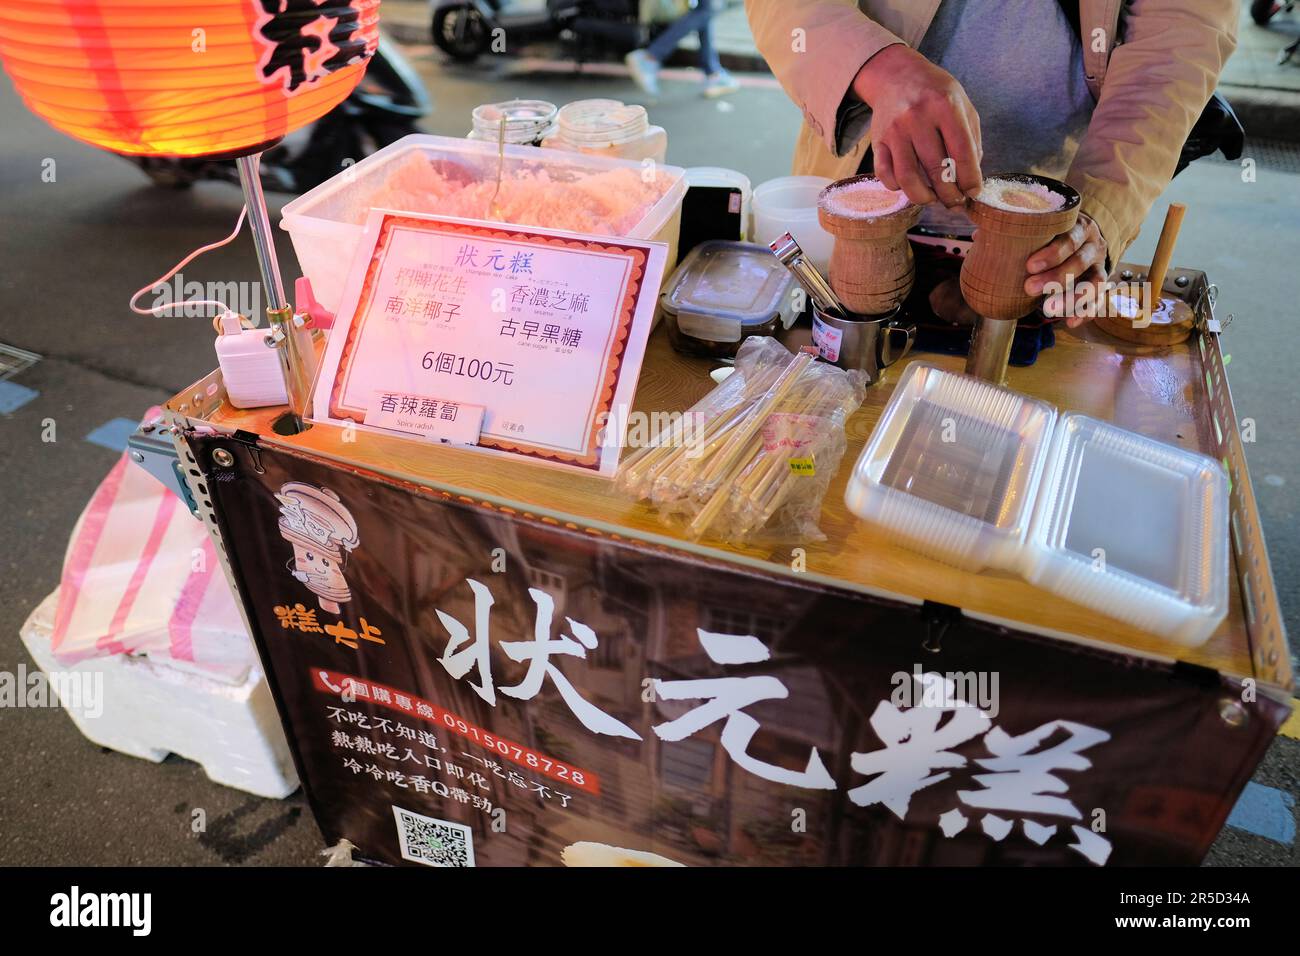 Steamed rice cake stand at Huaxi Street Tourist Night Market in Taipei, Taiwan; sweet rice dessert food cart; traditional Taiwanese food. Stock Photo